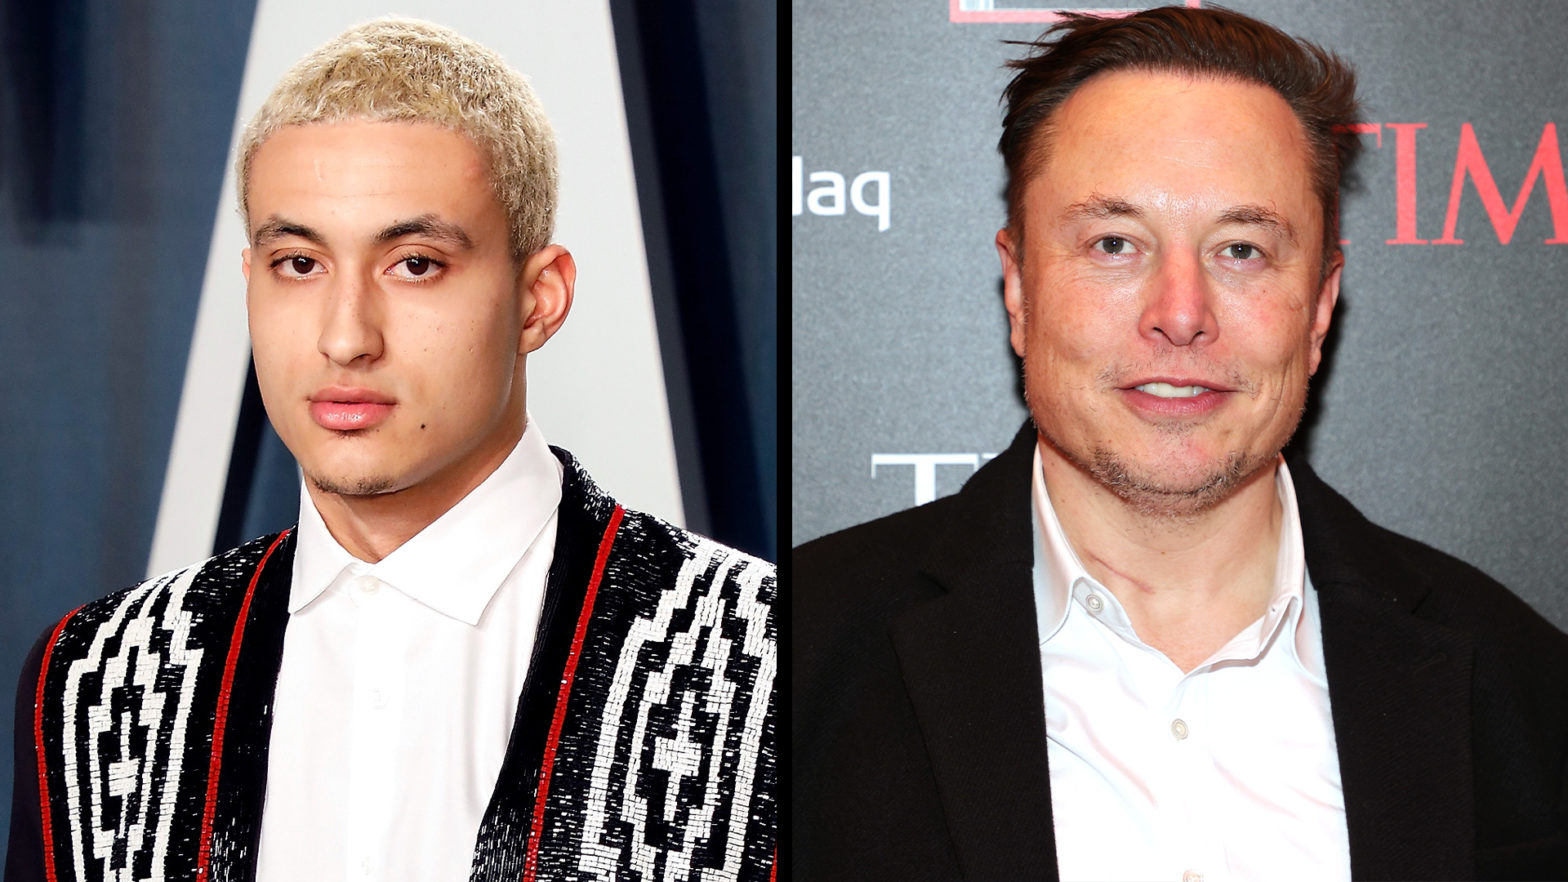 Could Kyle Kuzma's Recent Tweets About Elon Musk's $11B Tax Bill Serve As A Lesson For Us All?